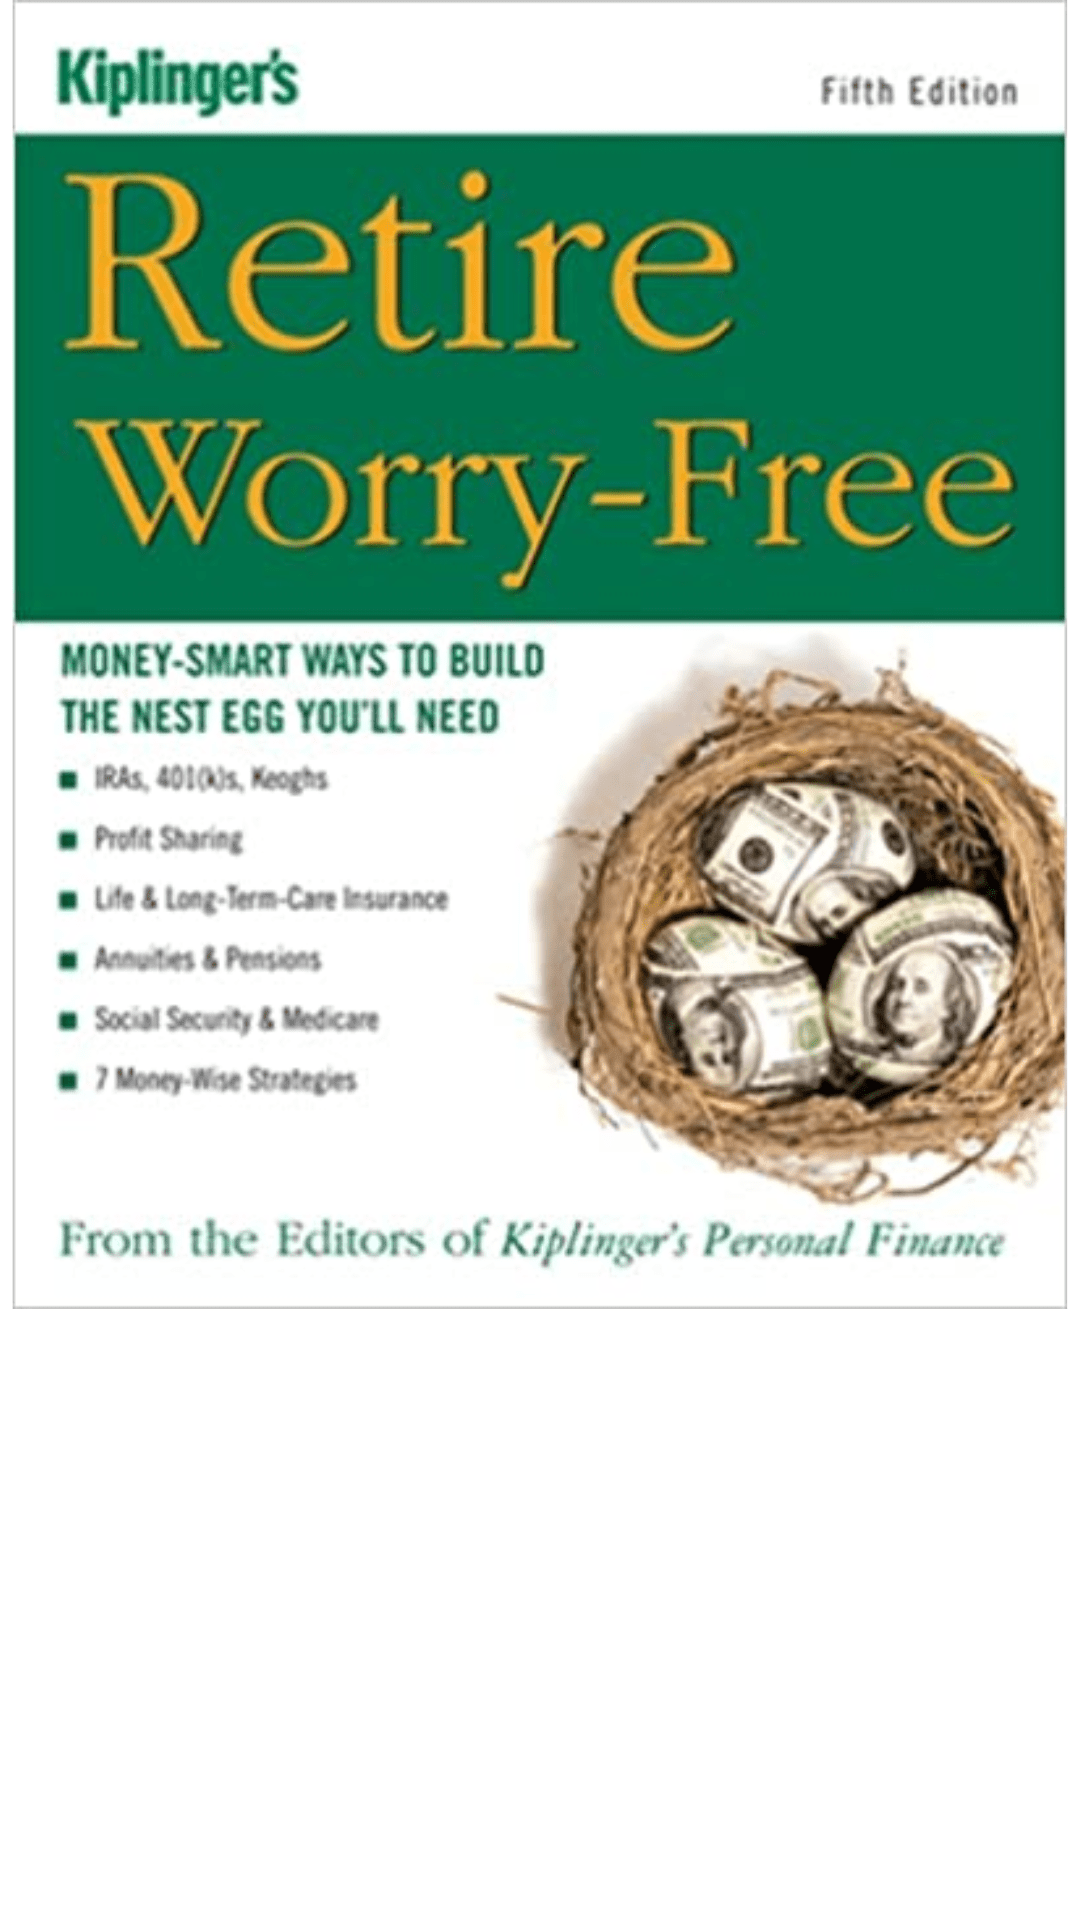 Retire Worry-Free: Money-Smart Ways to Build the Nest Egg You'll Need